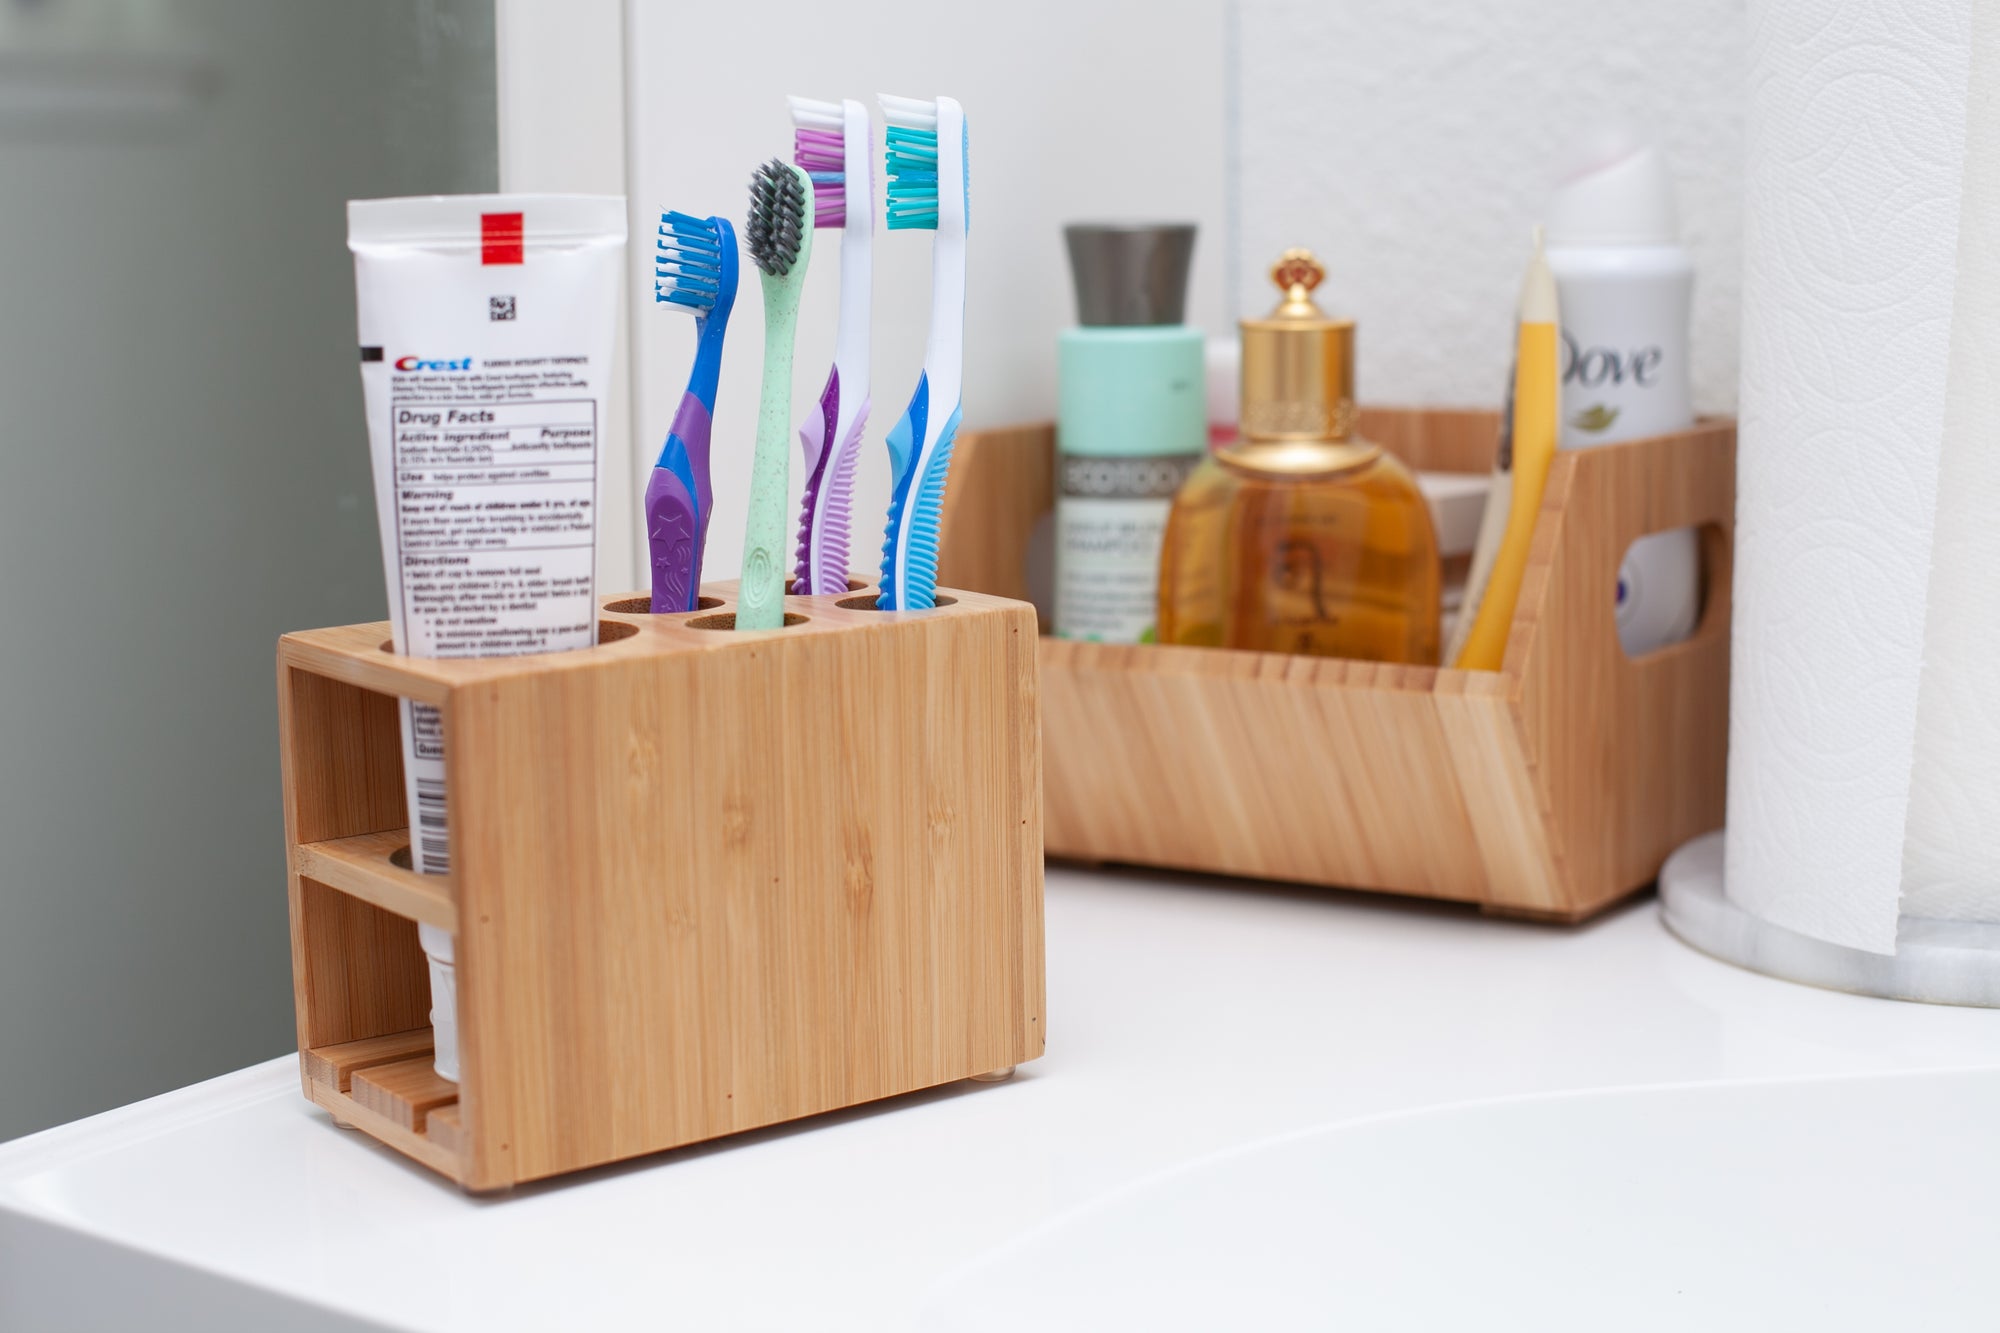 Bamboo Toothbrush & Toothpaste Holder